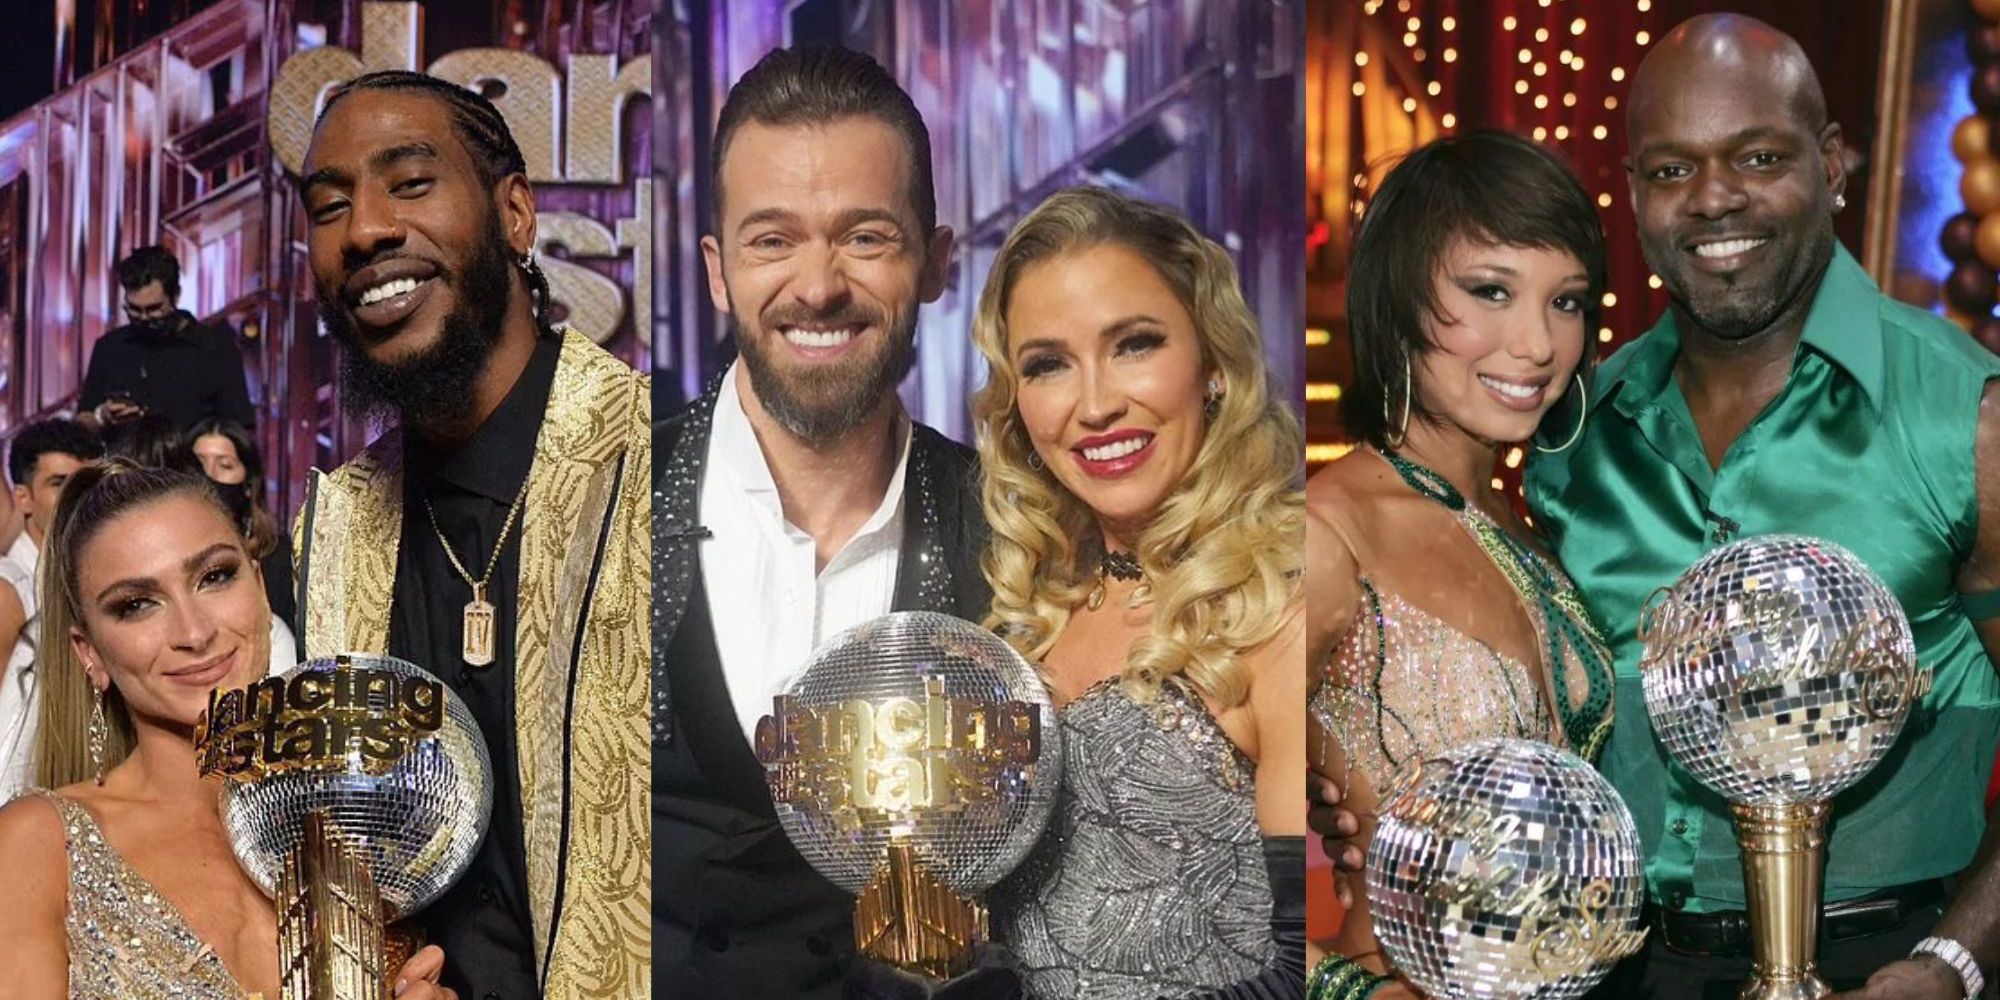 Three images of DWTS winners holding their mirrorball trophies